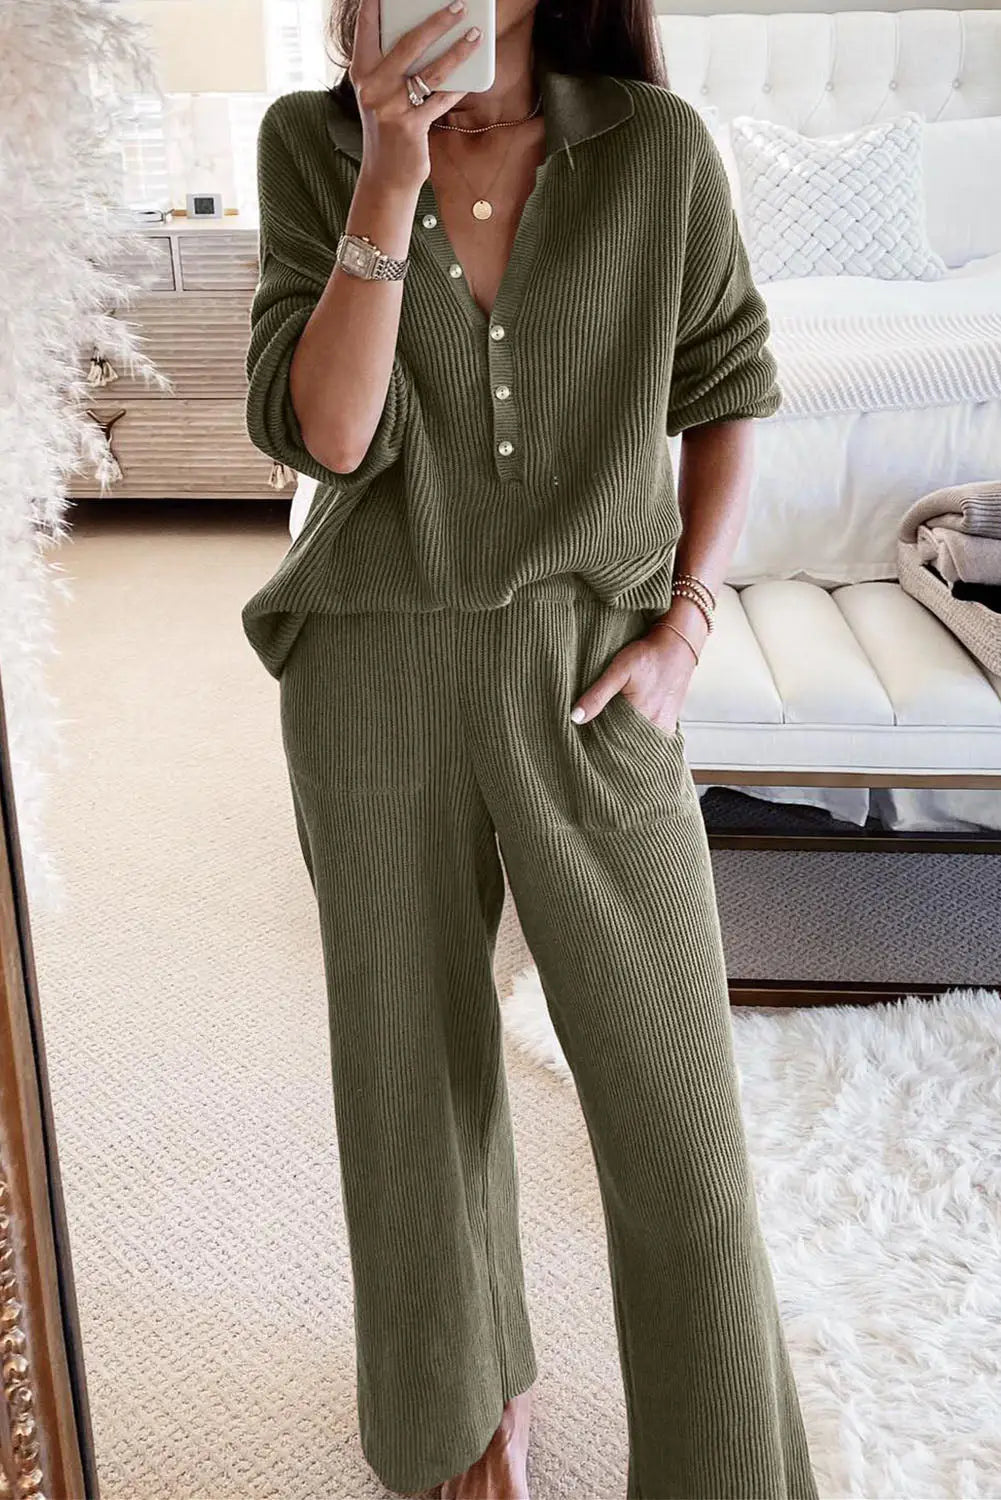 Green ribbed knit collared henley top and pants lounge outfit - s / 85% polyester + 10% viscose + 5% elastane